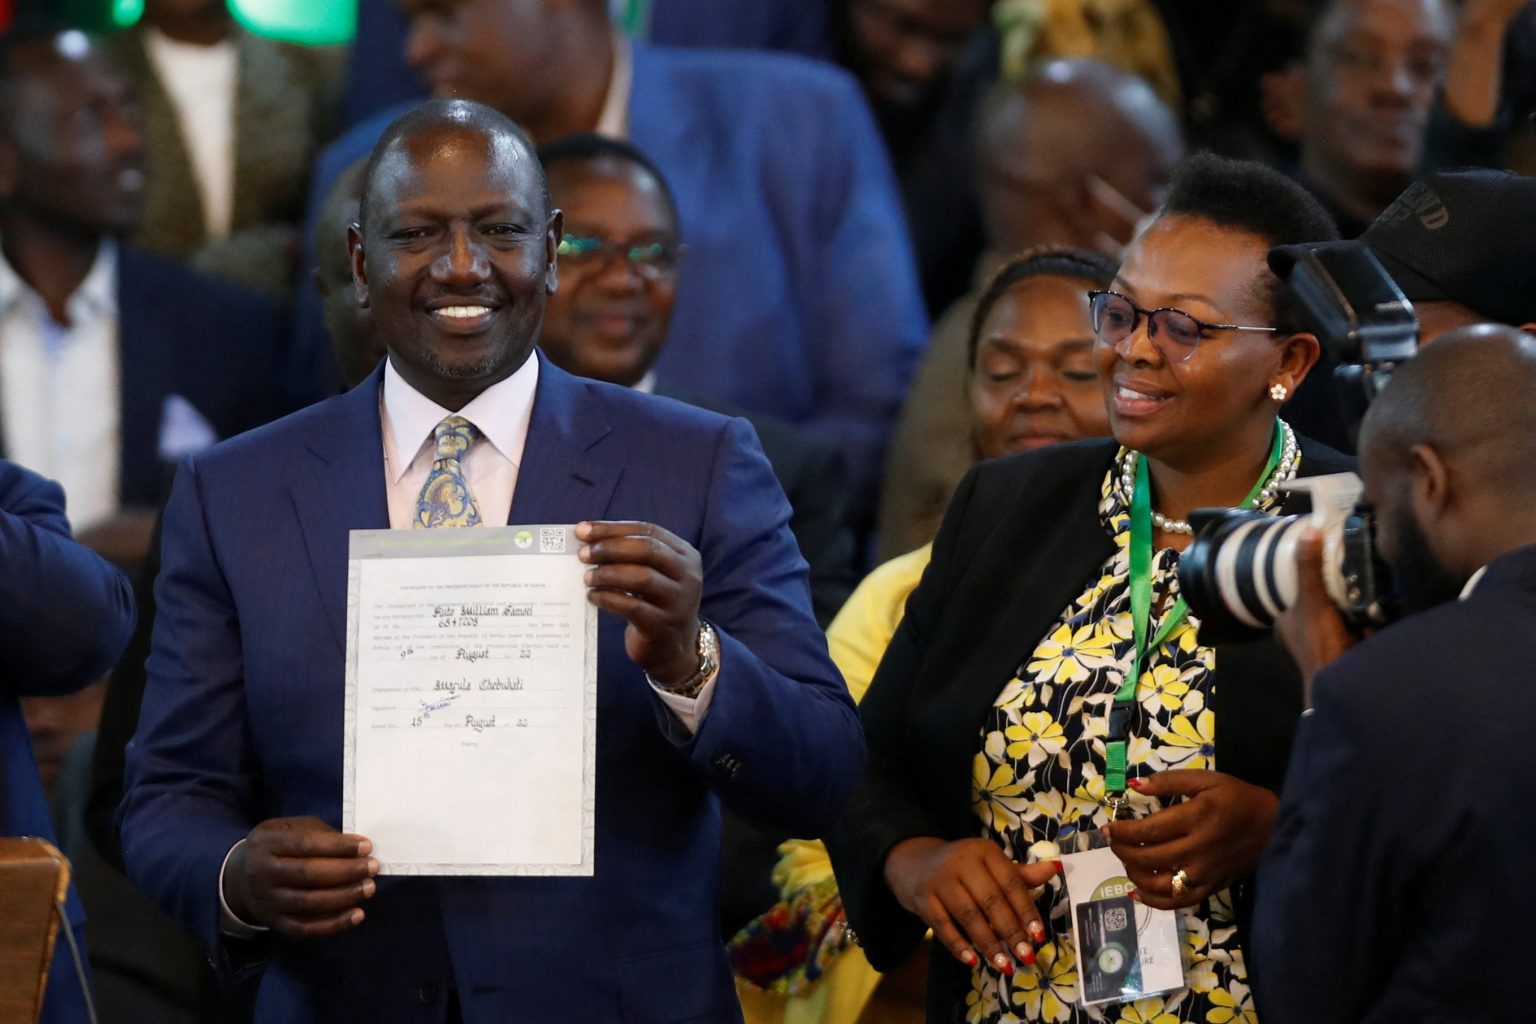 The incoming president William Samoei Ruto wants to exploit agriculture and job creation to significantly expand the economy as part of a bottom-up economic approach. www.theexchange.africa